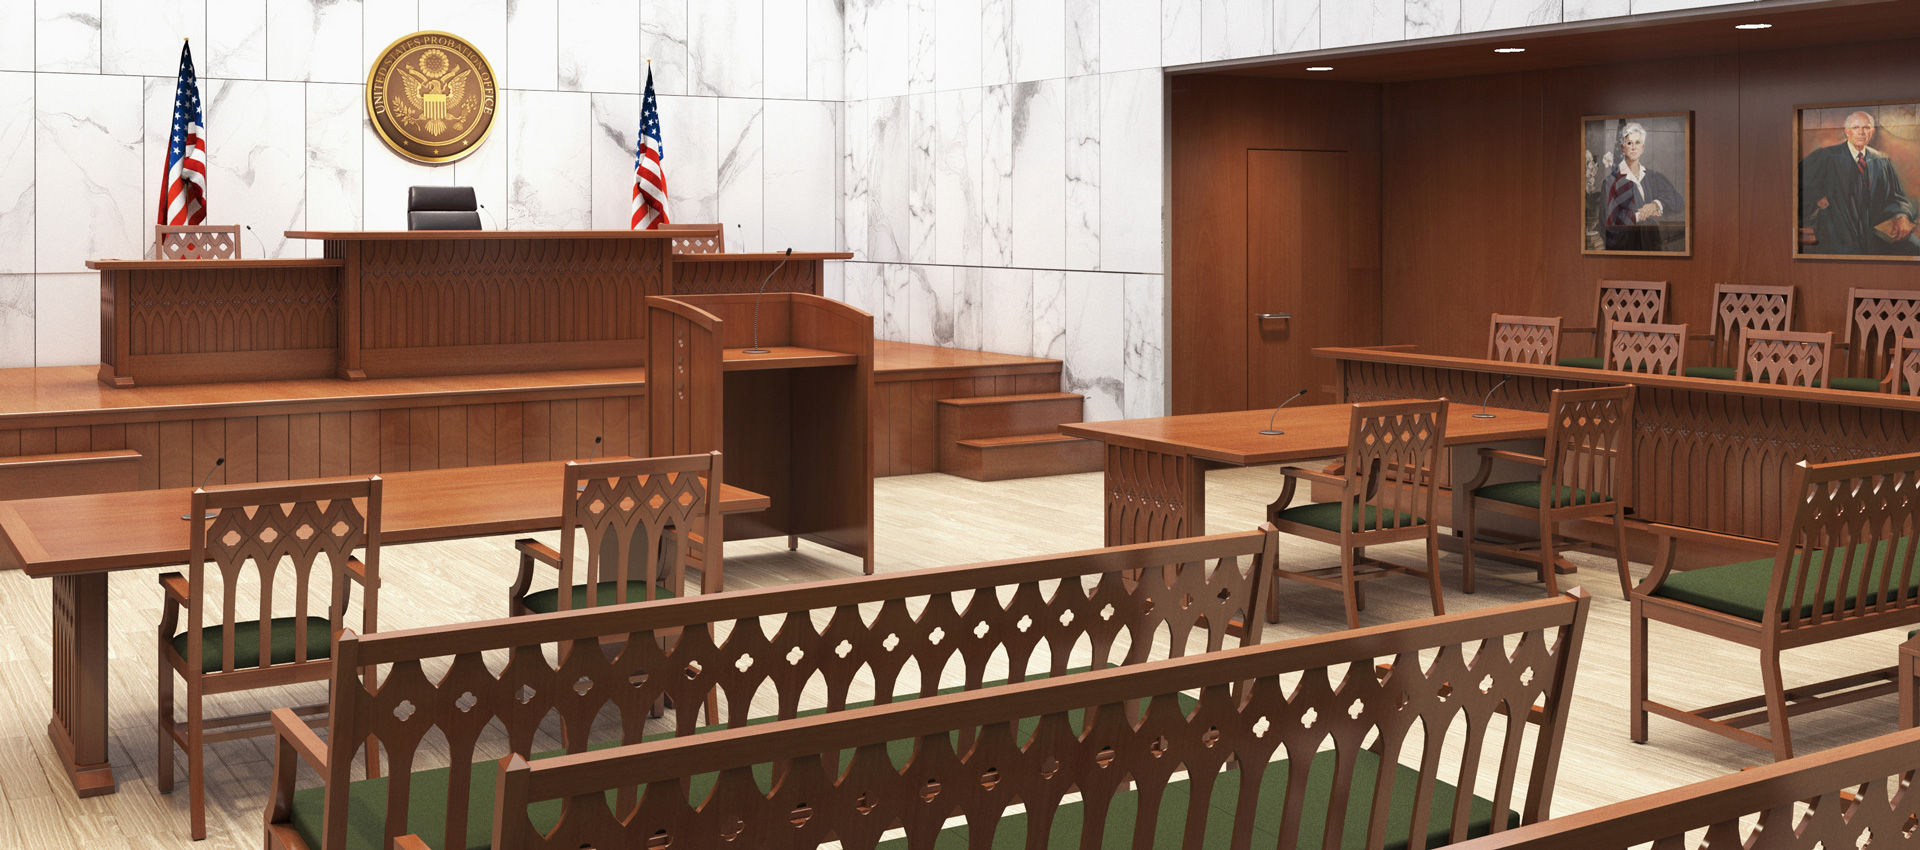 Wood courtroom furniture in gothic style